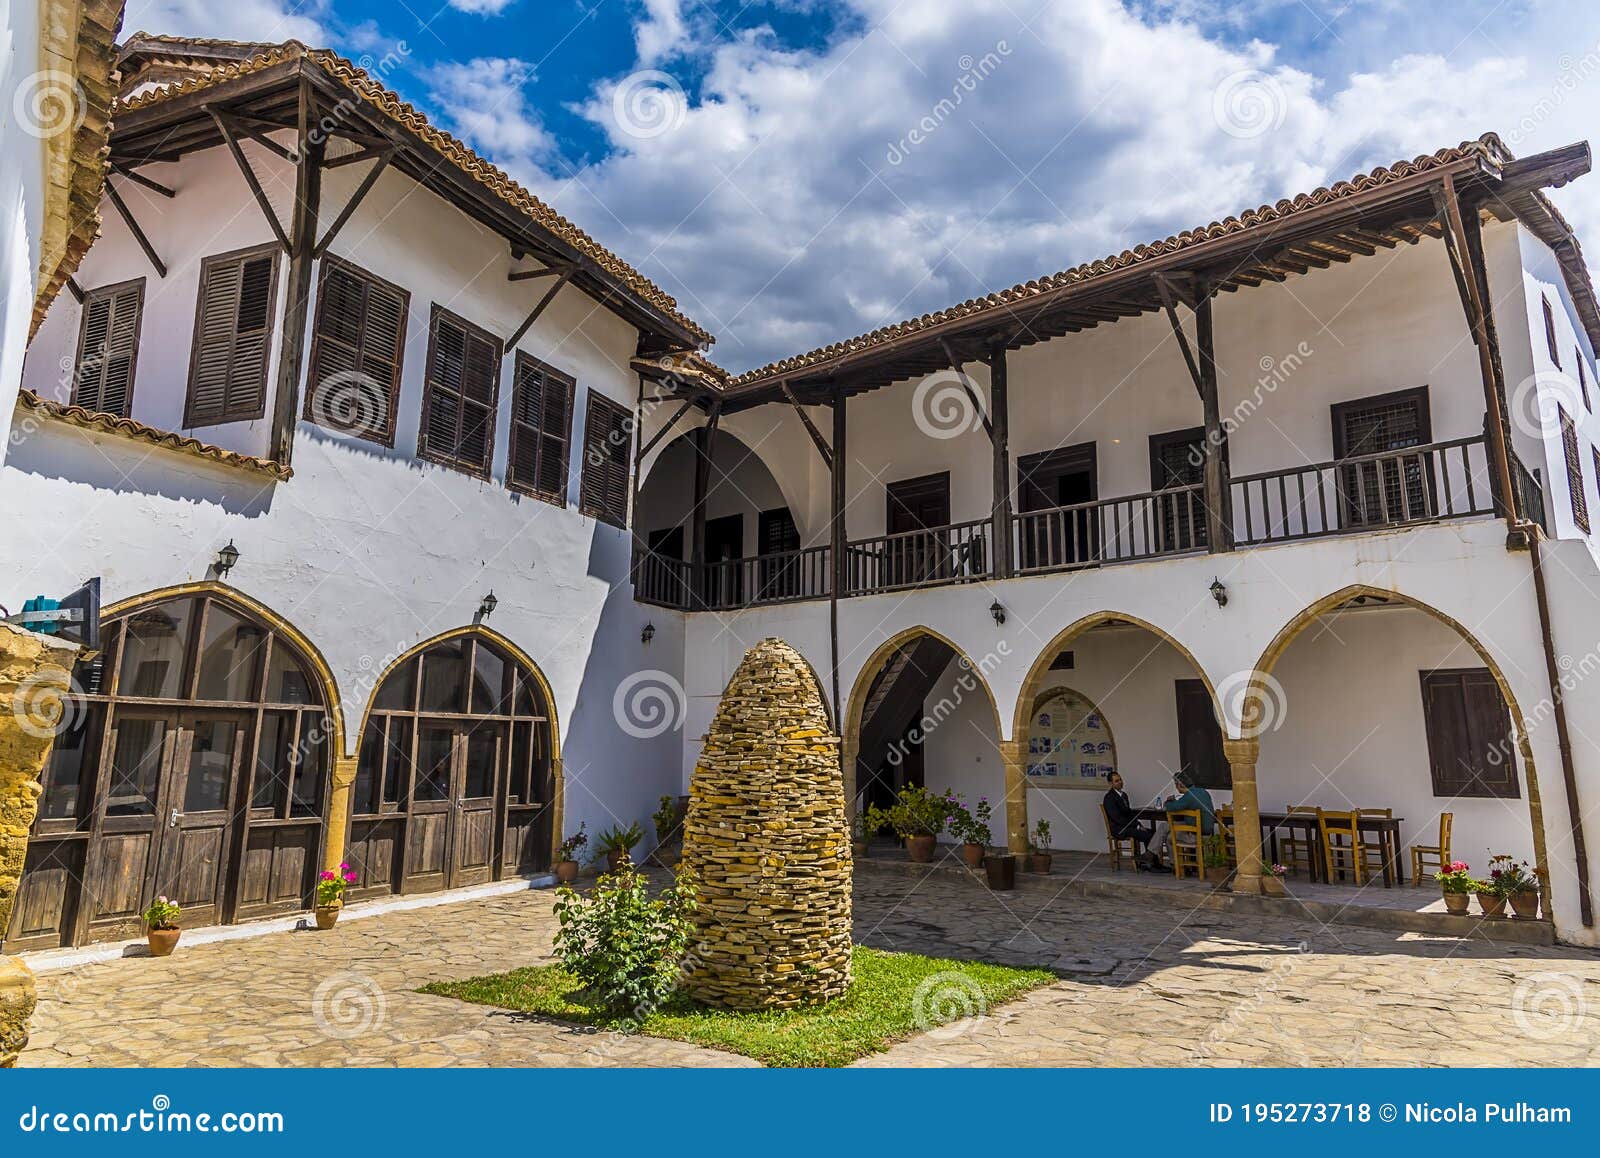 the peace and tranquillity of a courtyard in nicosia, northern cyprus